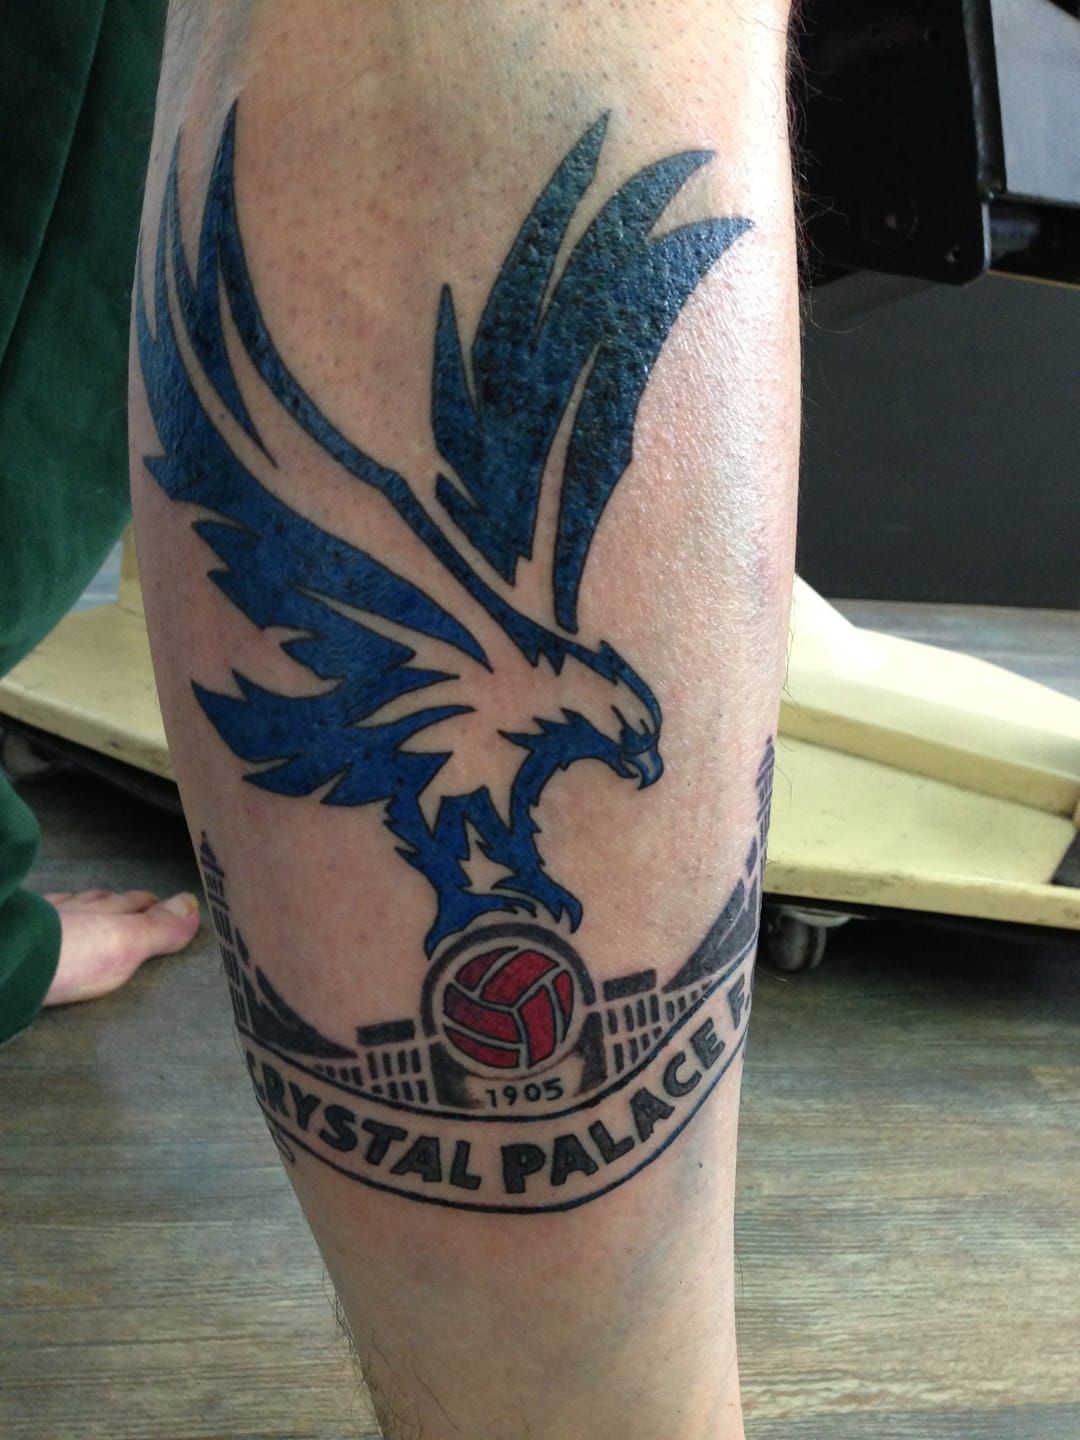 Tattoos  Crystal Palace FC Supporters Website  The Holmesdale Online